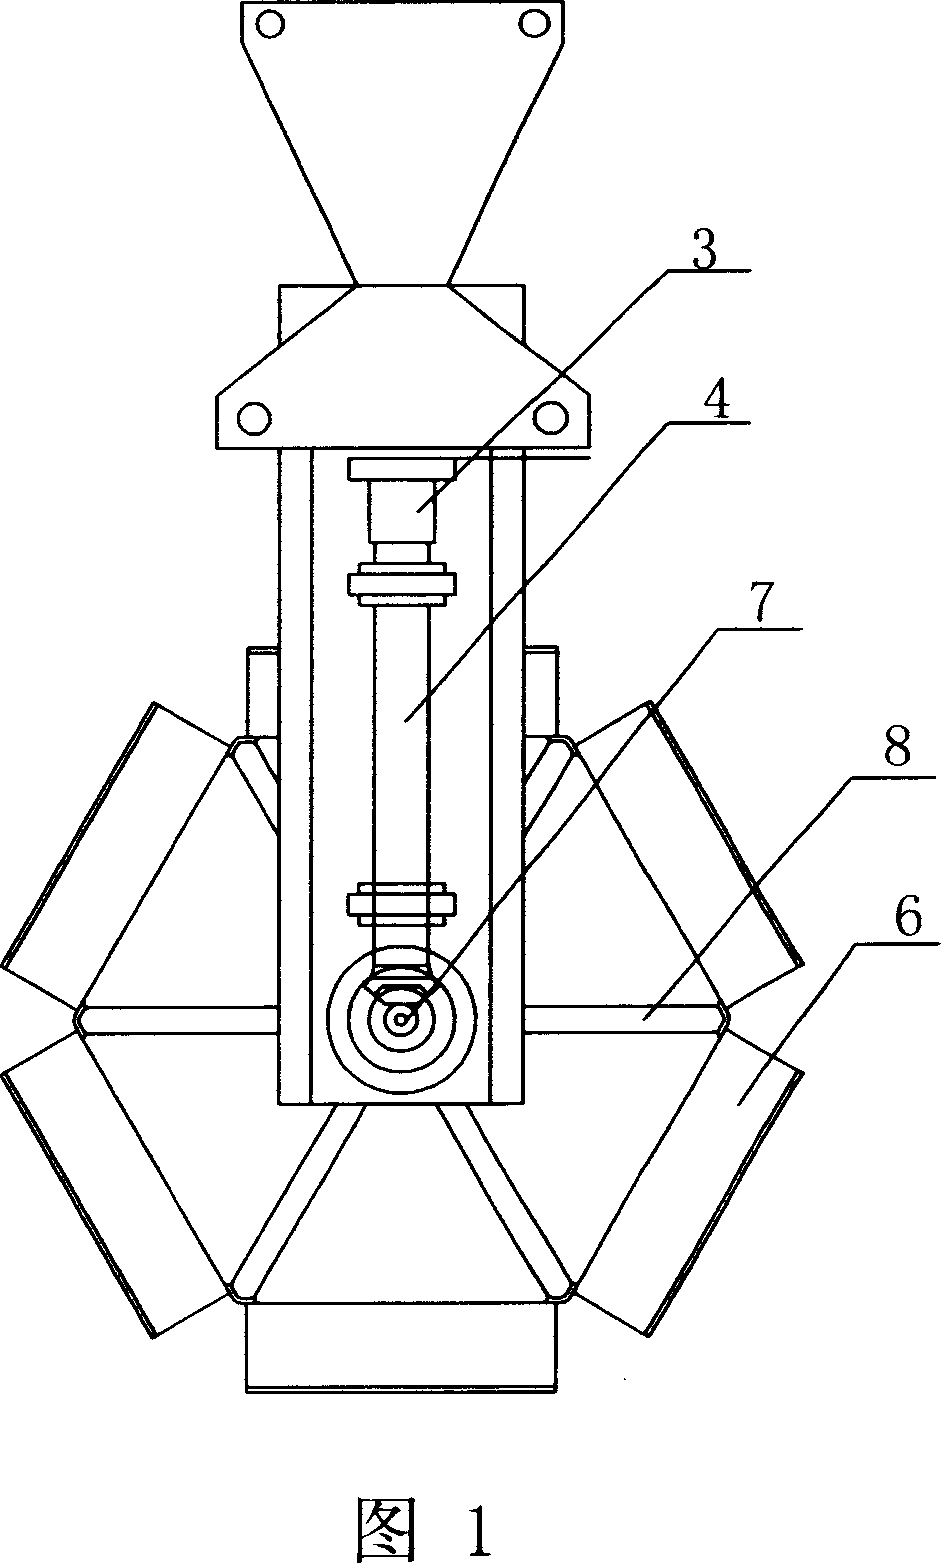 Conduction system applicable to plating equipment